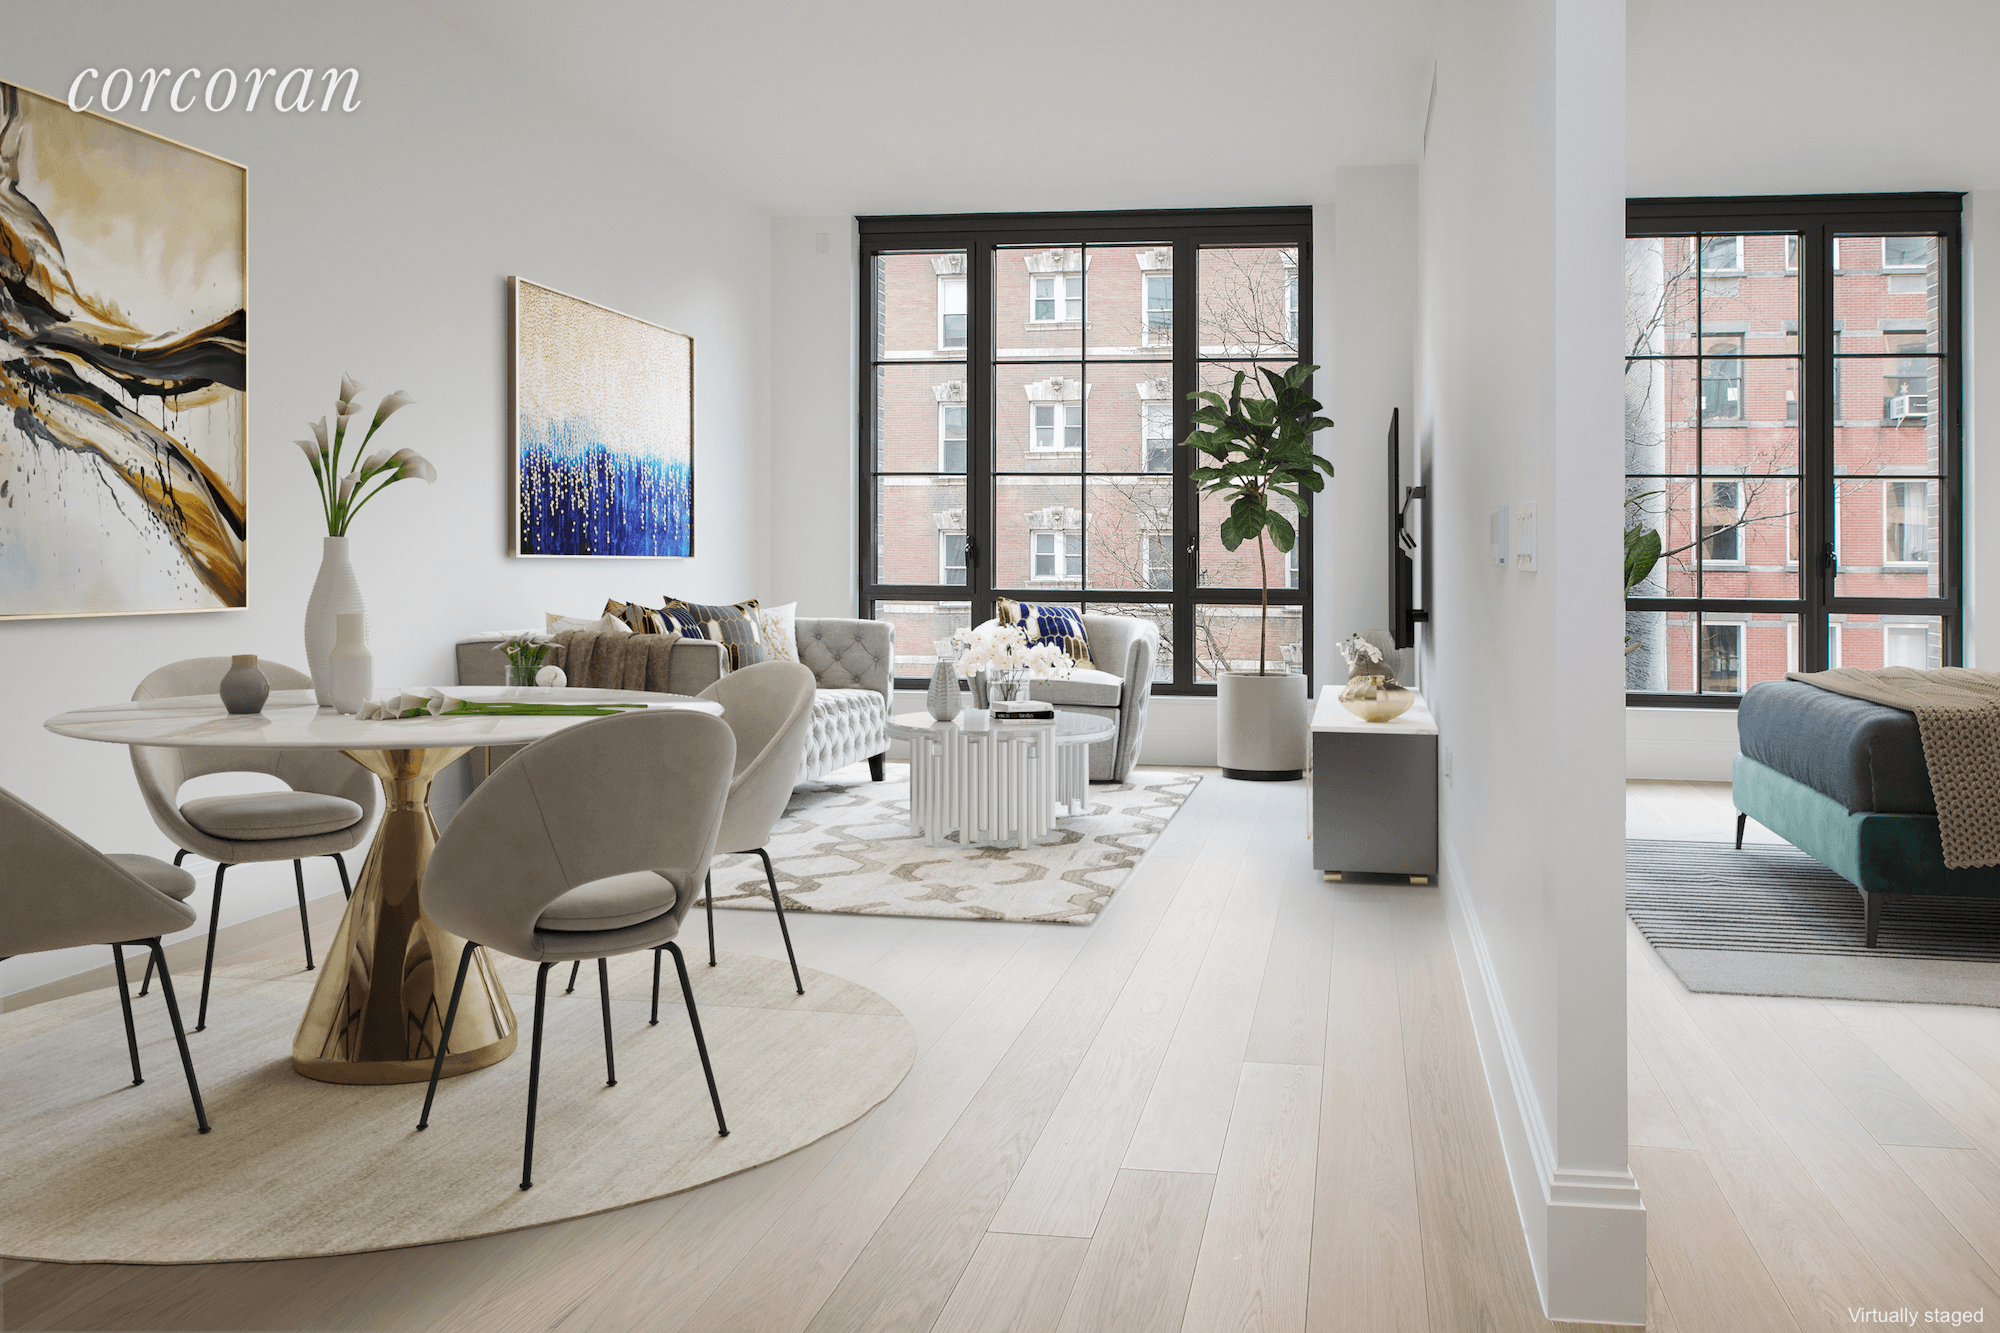 Beautiful Sunny 1BR with Southern Exposure, 10'7 High Ceiling combined with Floor to Ceiling windows brings in tons of light and lovely East Village street view.